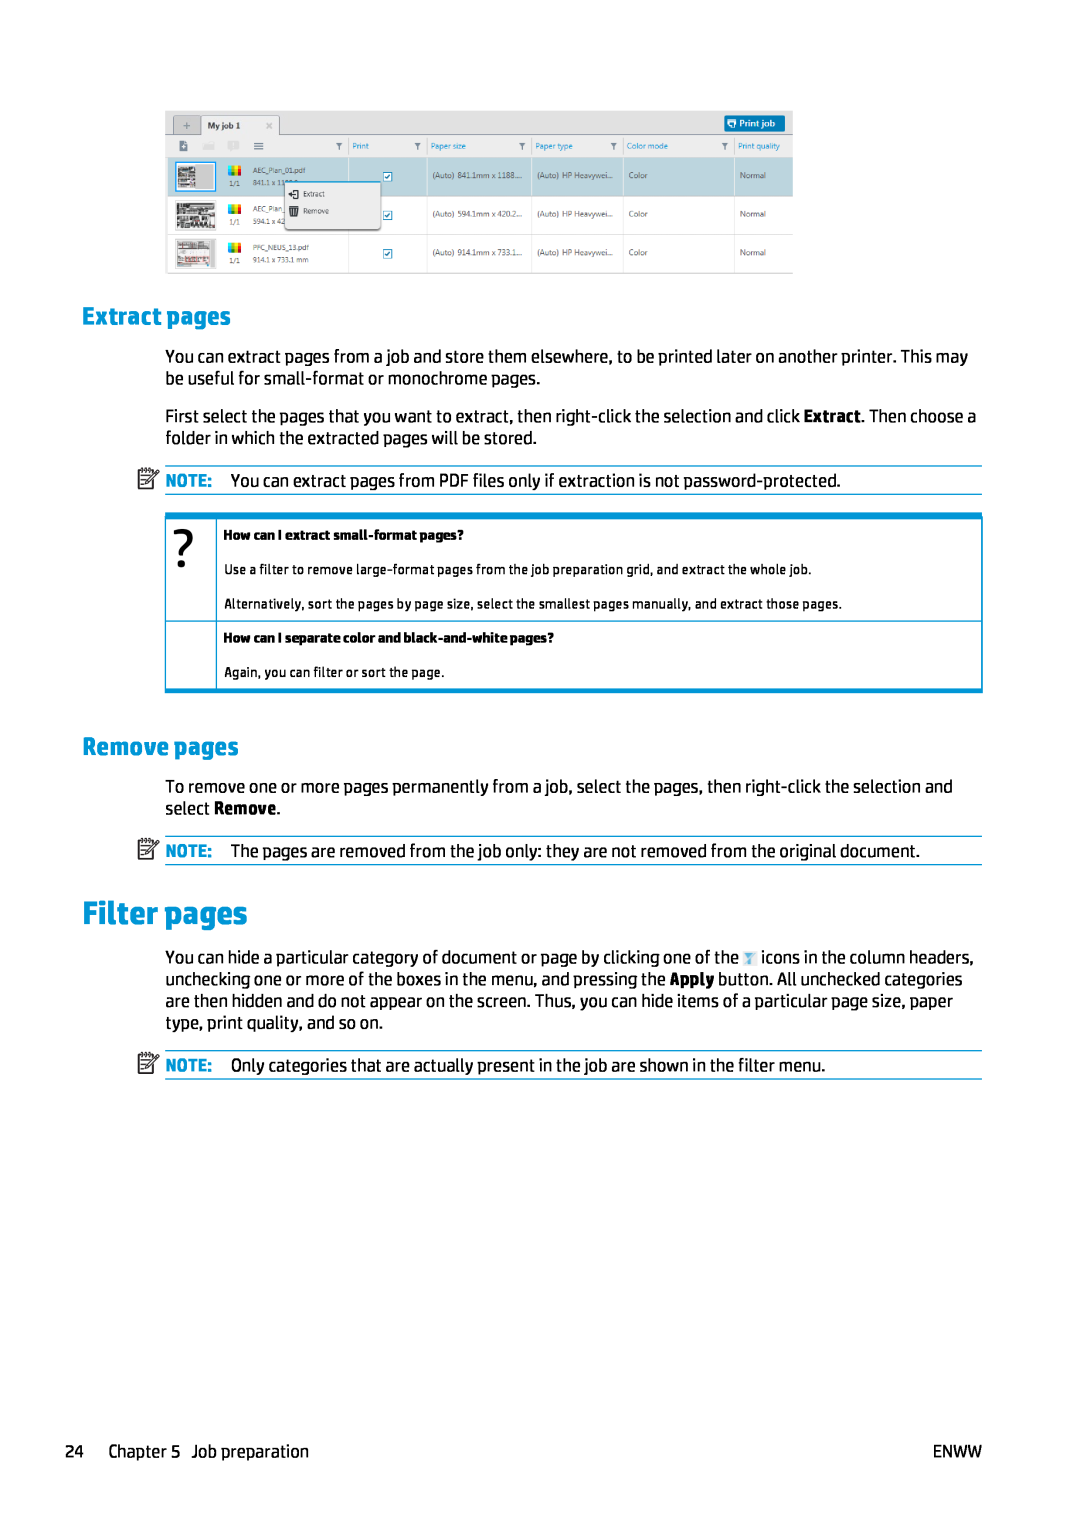 HP SmartStream Software for s manual Filter pages, Extract pages, Remove pages 